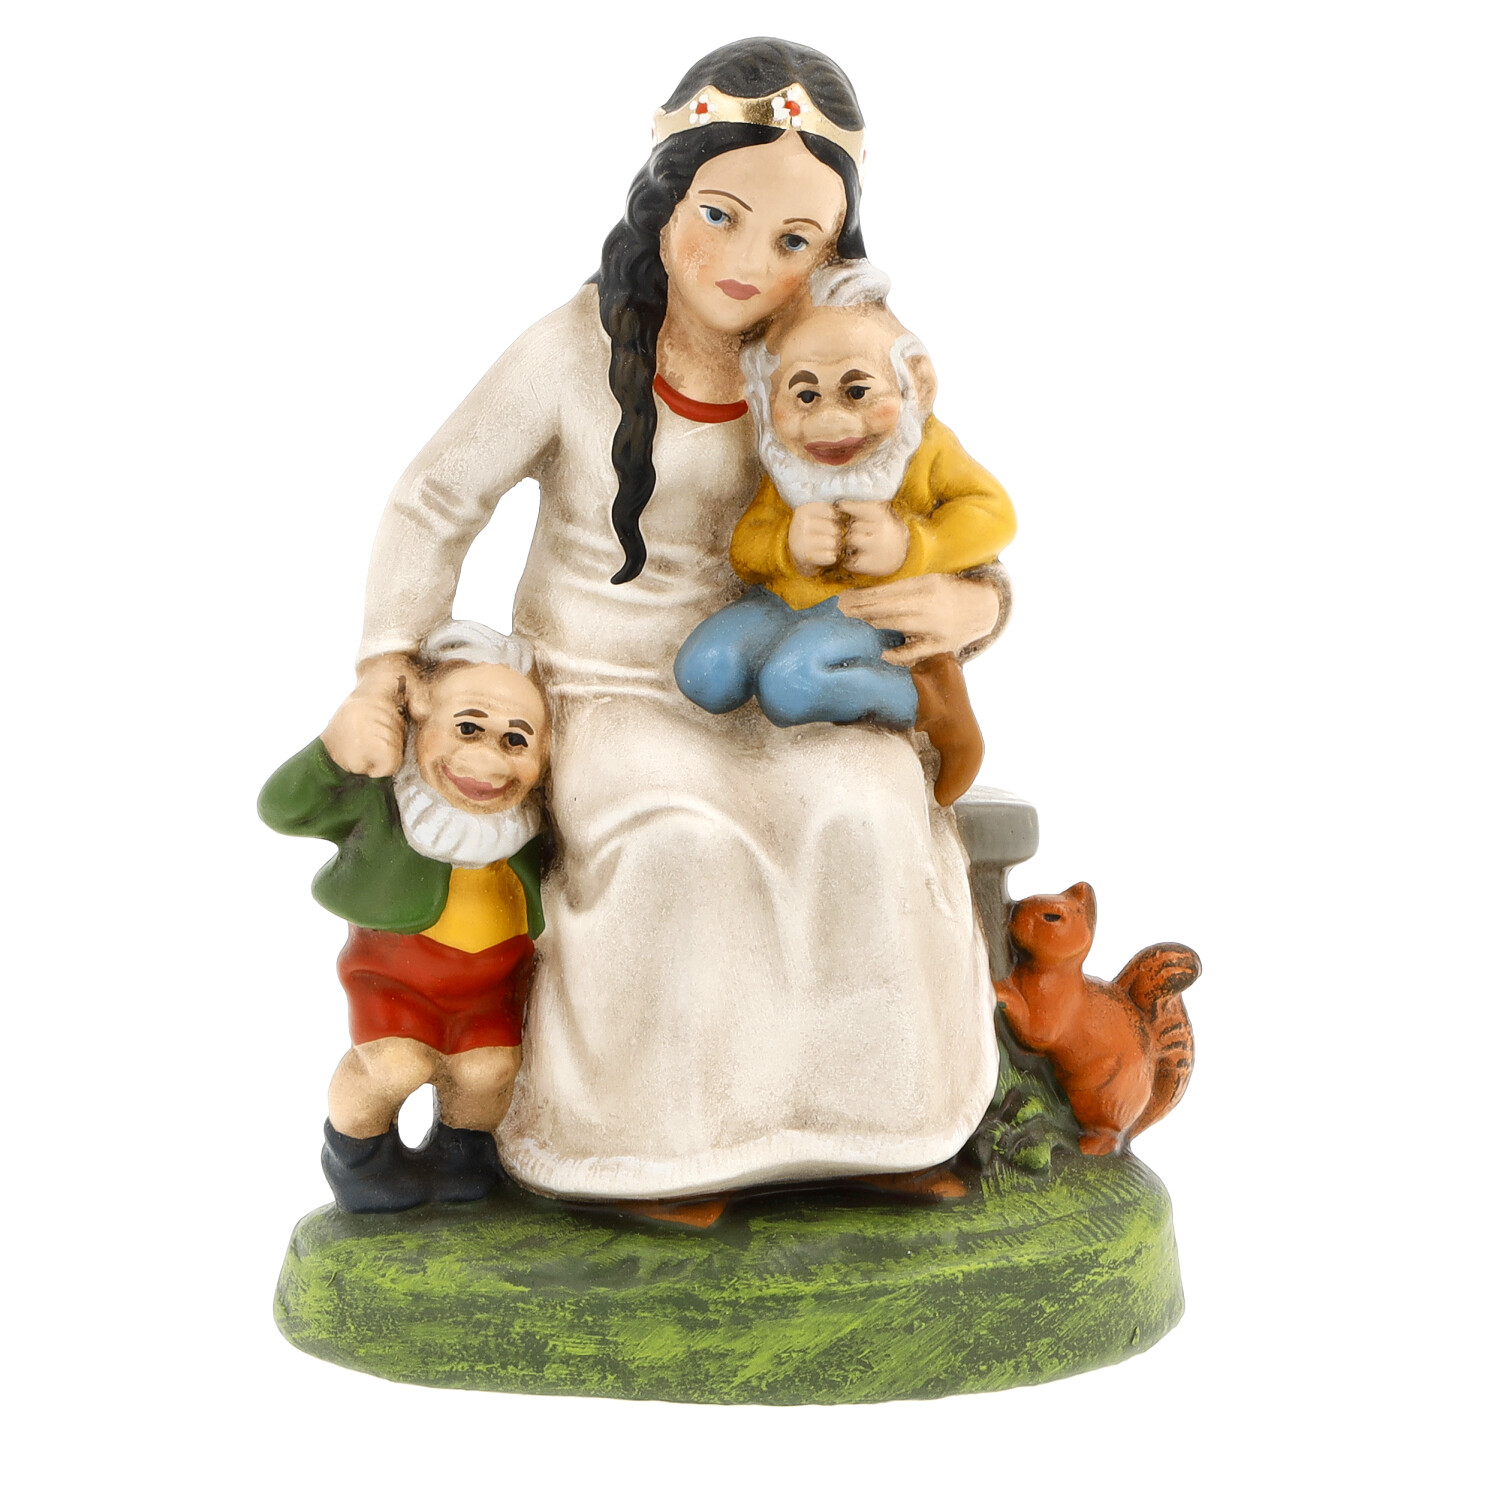 Snow White with dwarfs - Marolin Papermaché figure - Brothers Grimm - made in Germany